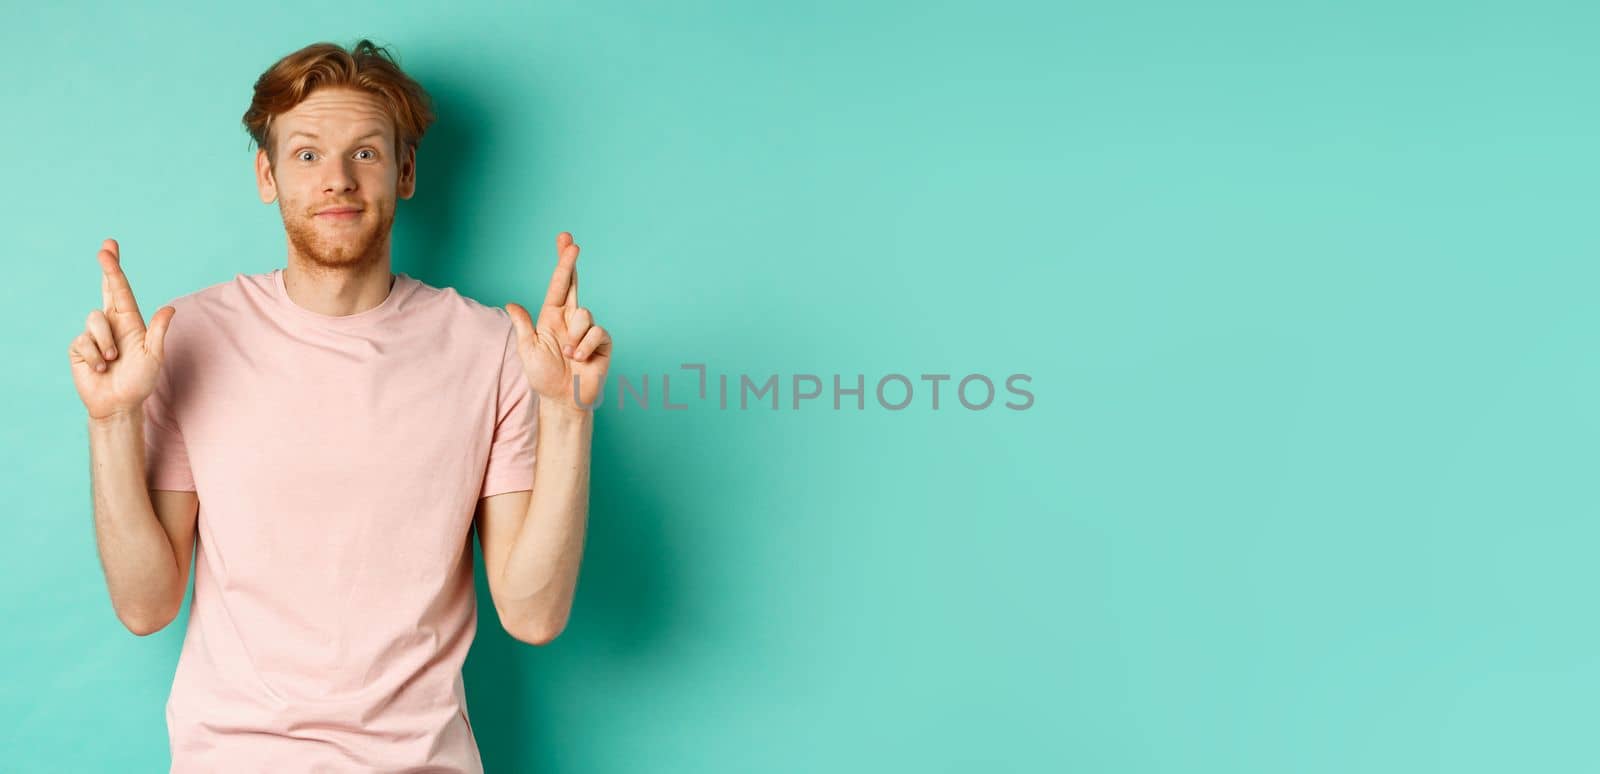 Smiling hopeful man with red hair making a wish, cross fingers for good luck and expecting something good, standing over turquoise background.